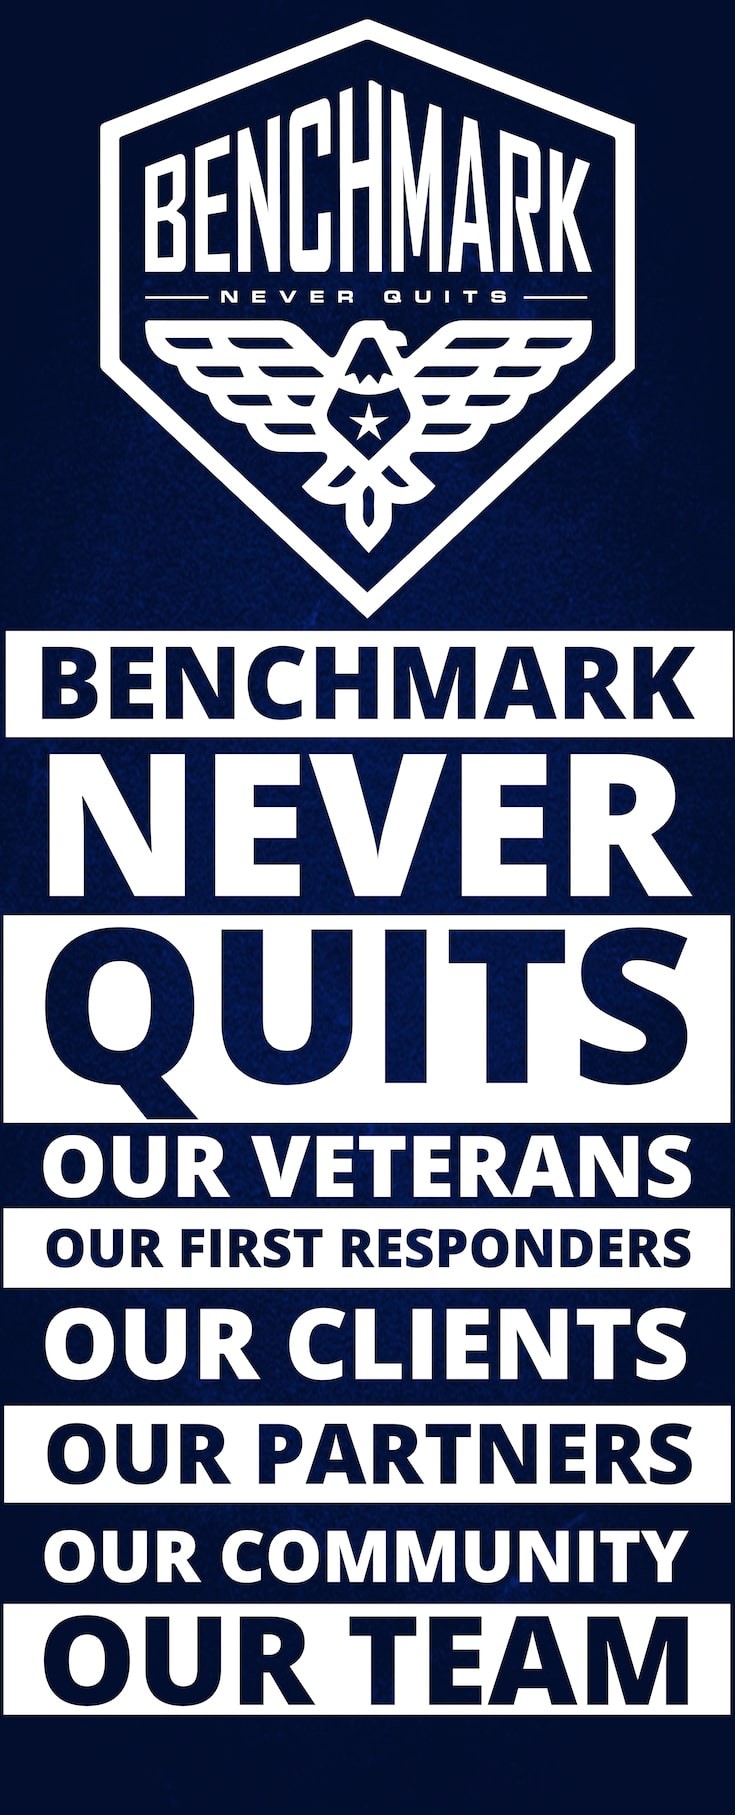 Benchmark Never Quits Our Veterans, Our Responsibilities, Our clients, Our Partners, Our Community, Our Team stand up banner